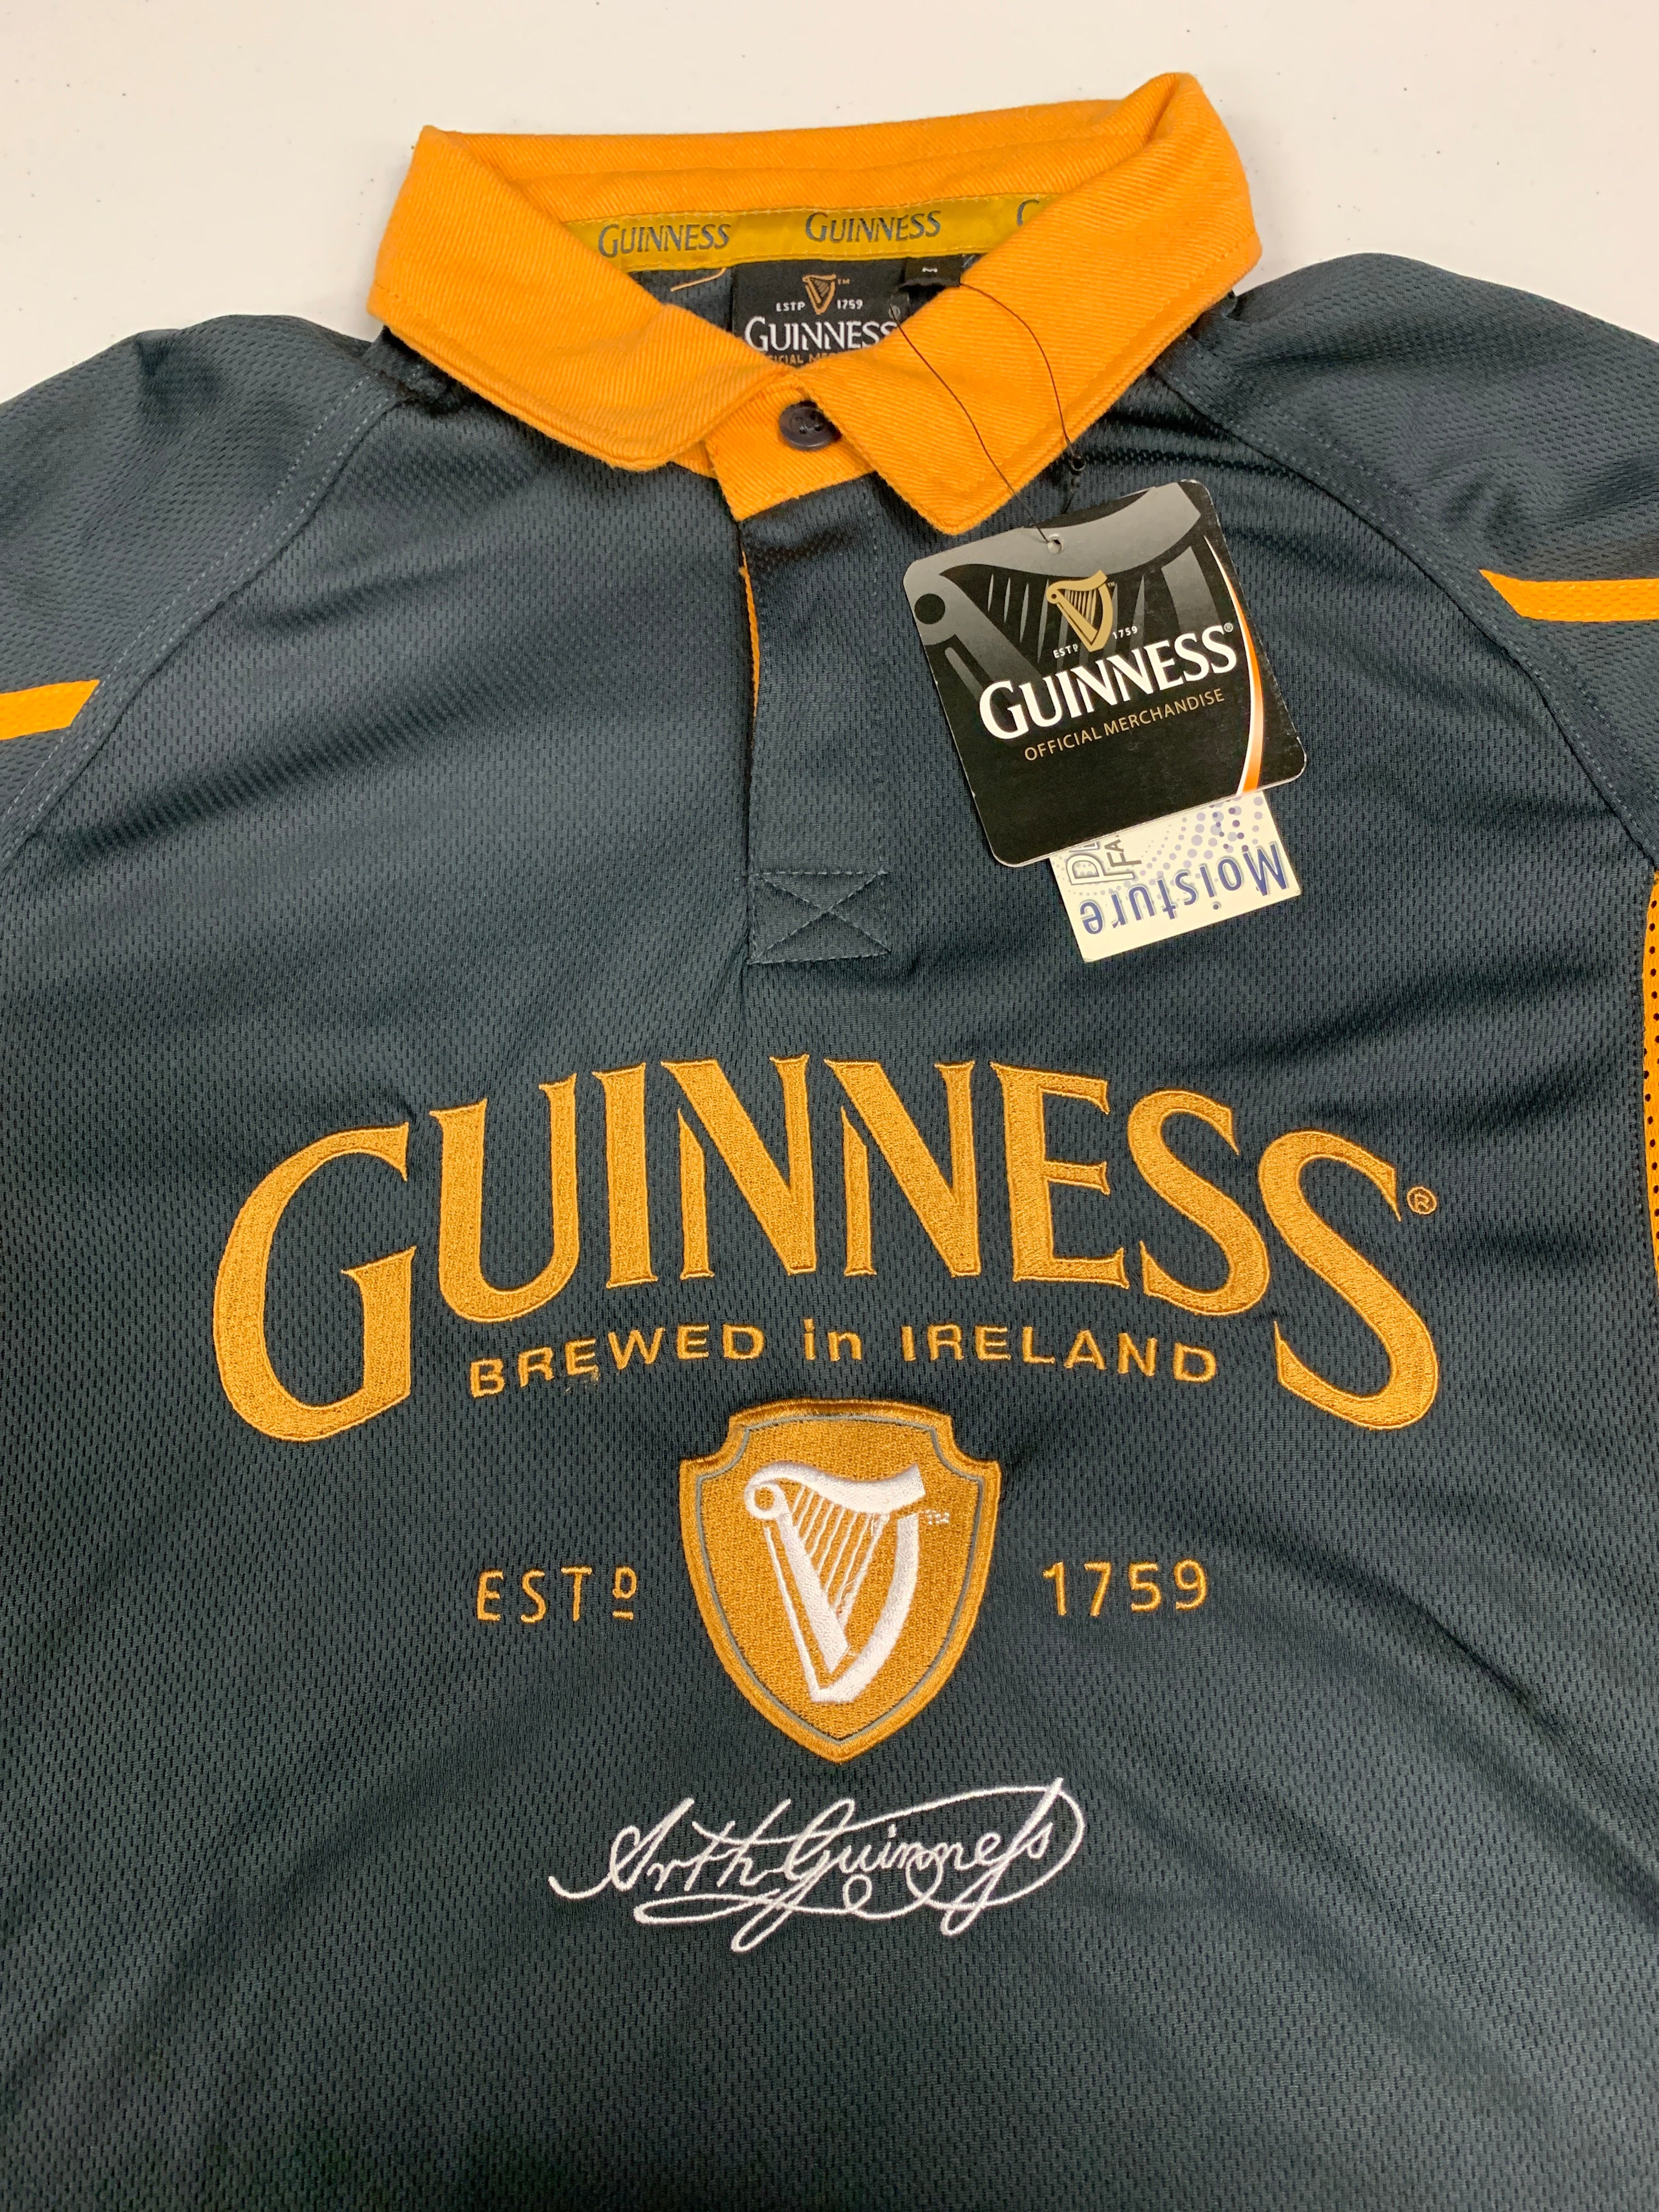 Guinness Grey and Mustard 1759 Rugby Shirt